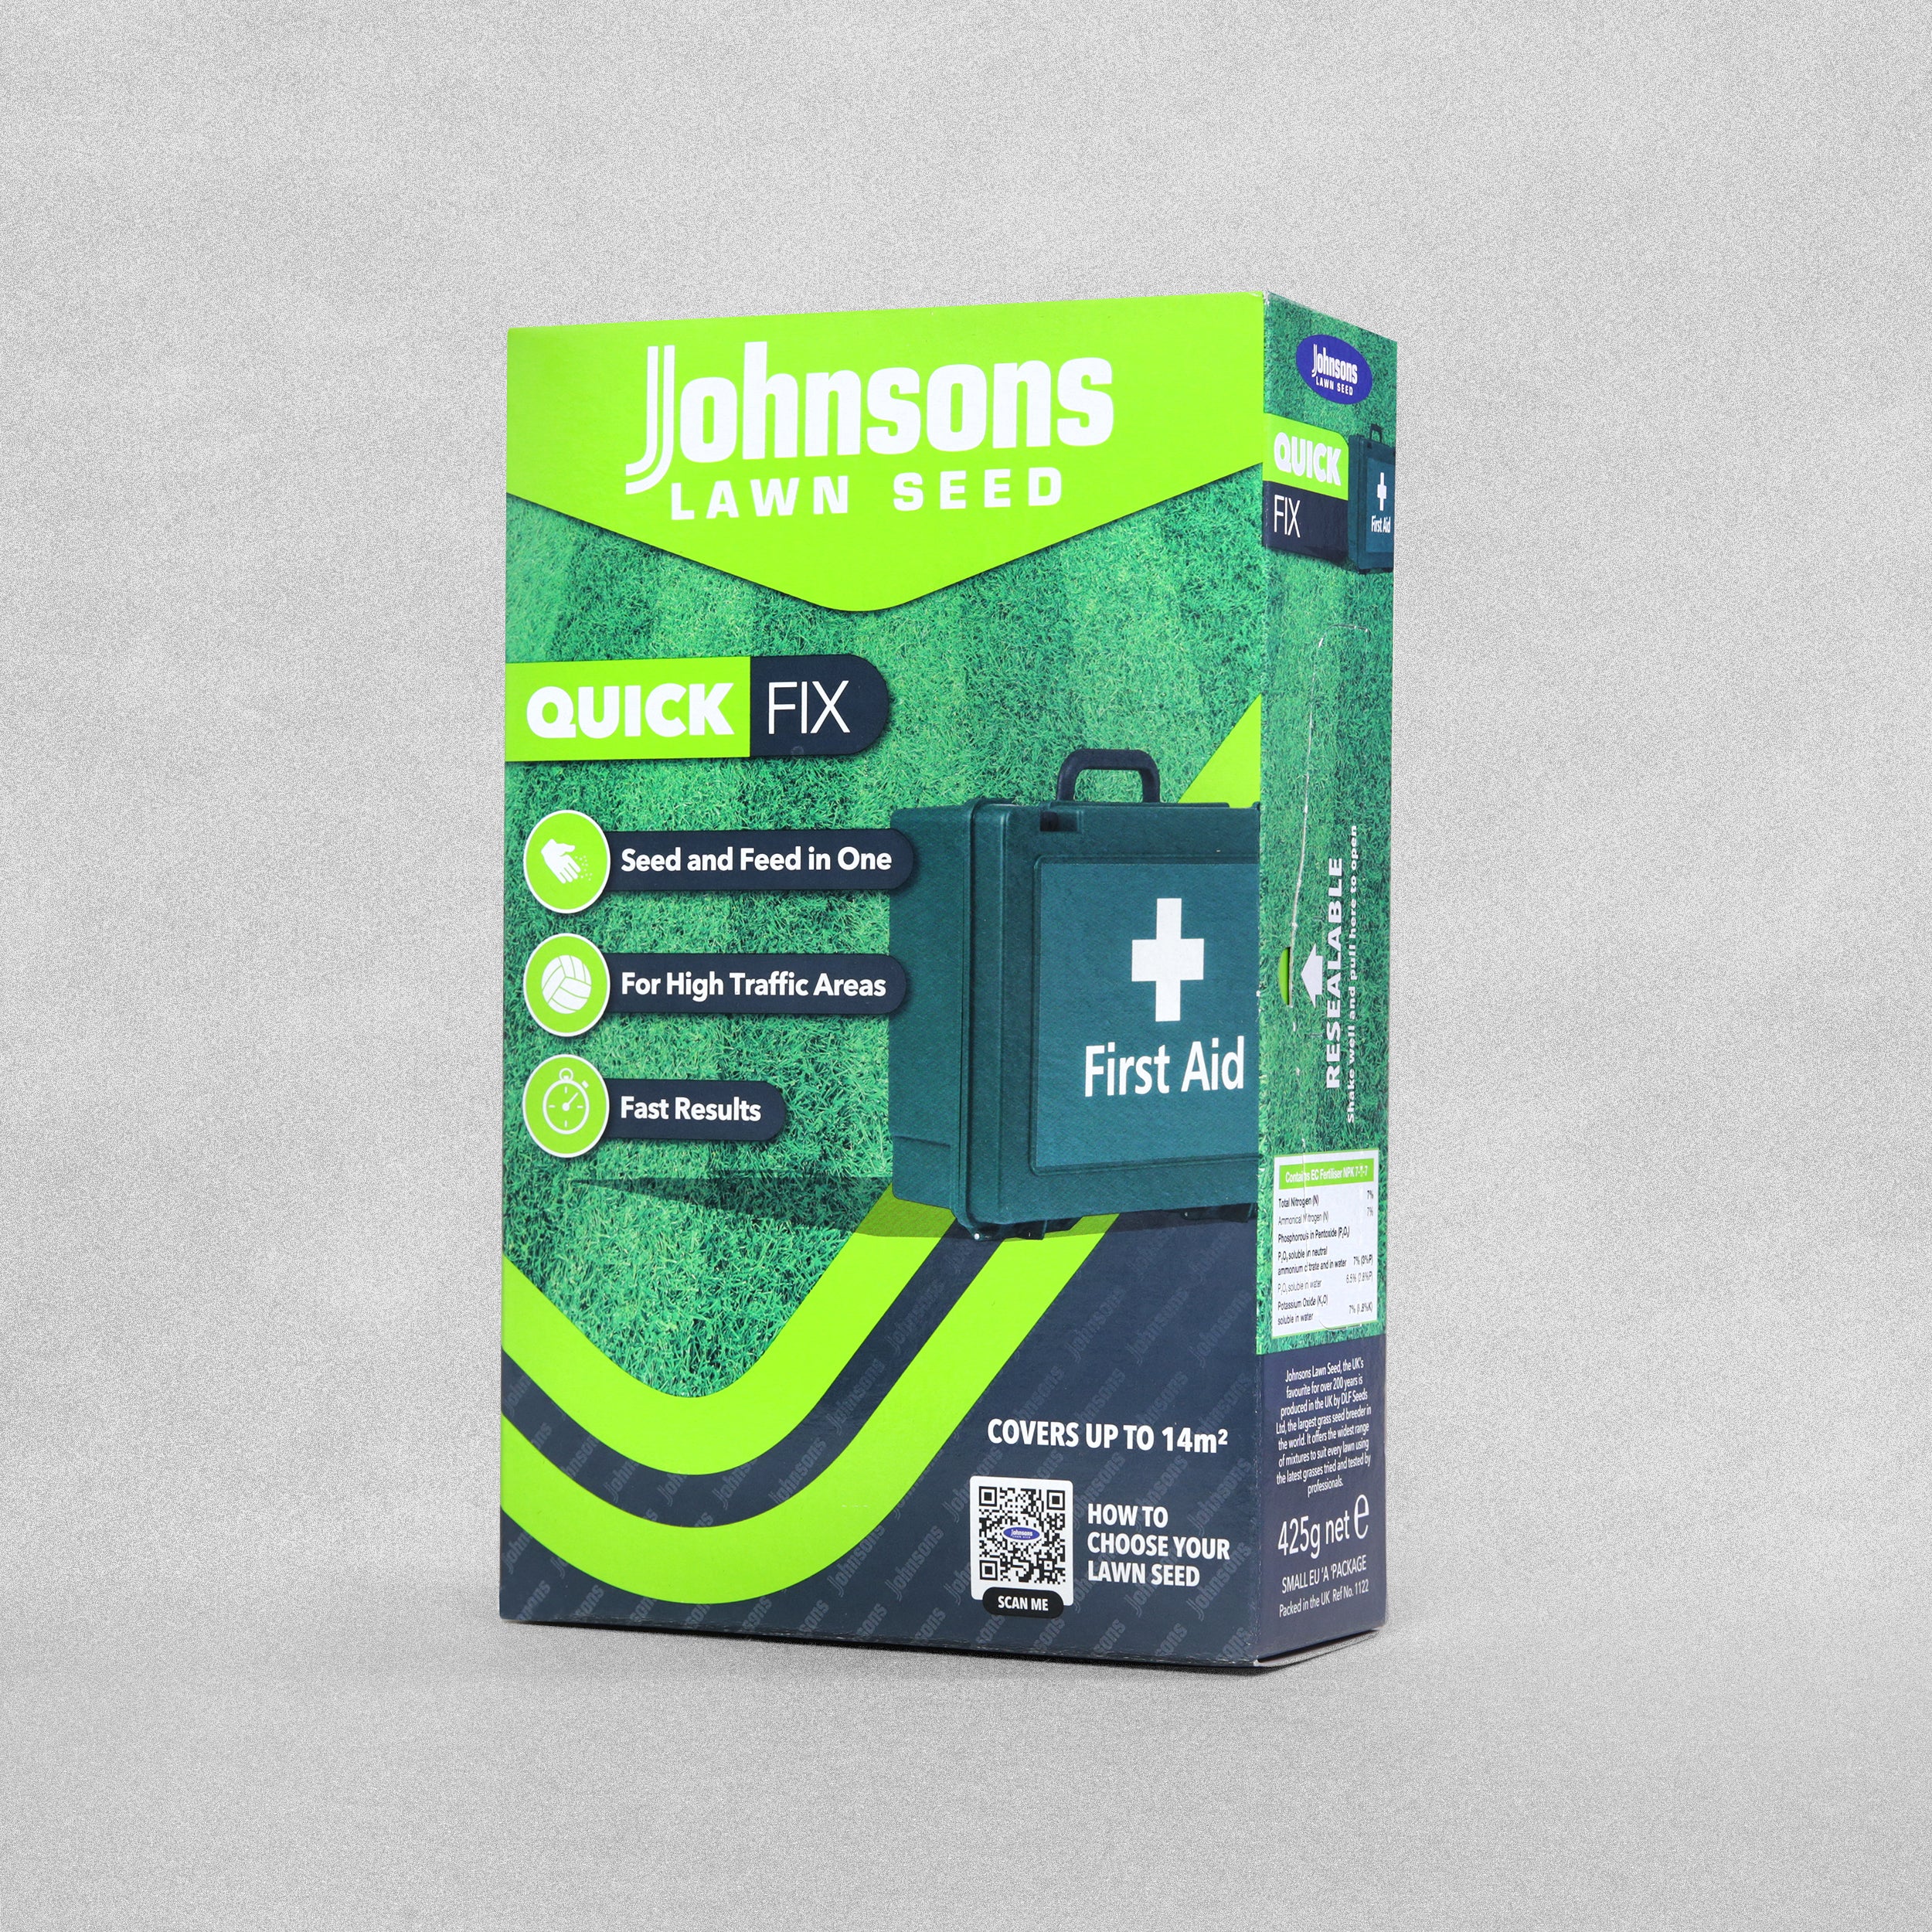 Johnsons Lawn Seed Quick Fix 425g - 14m2 Coverage